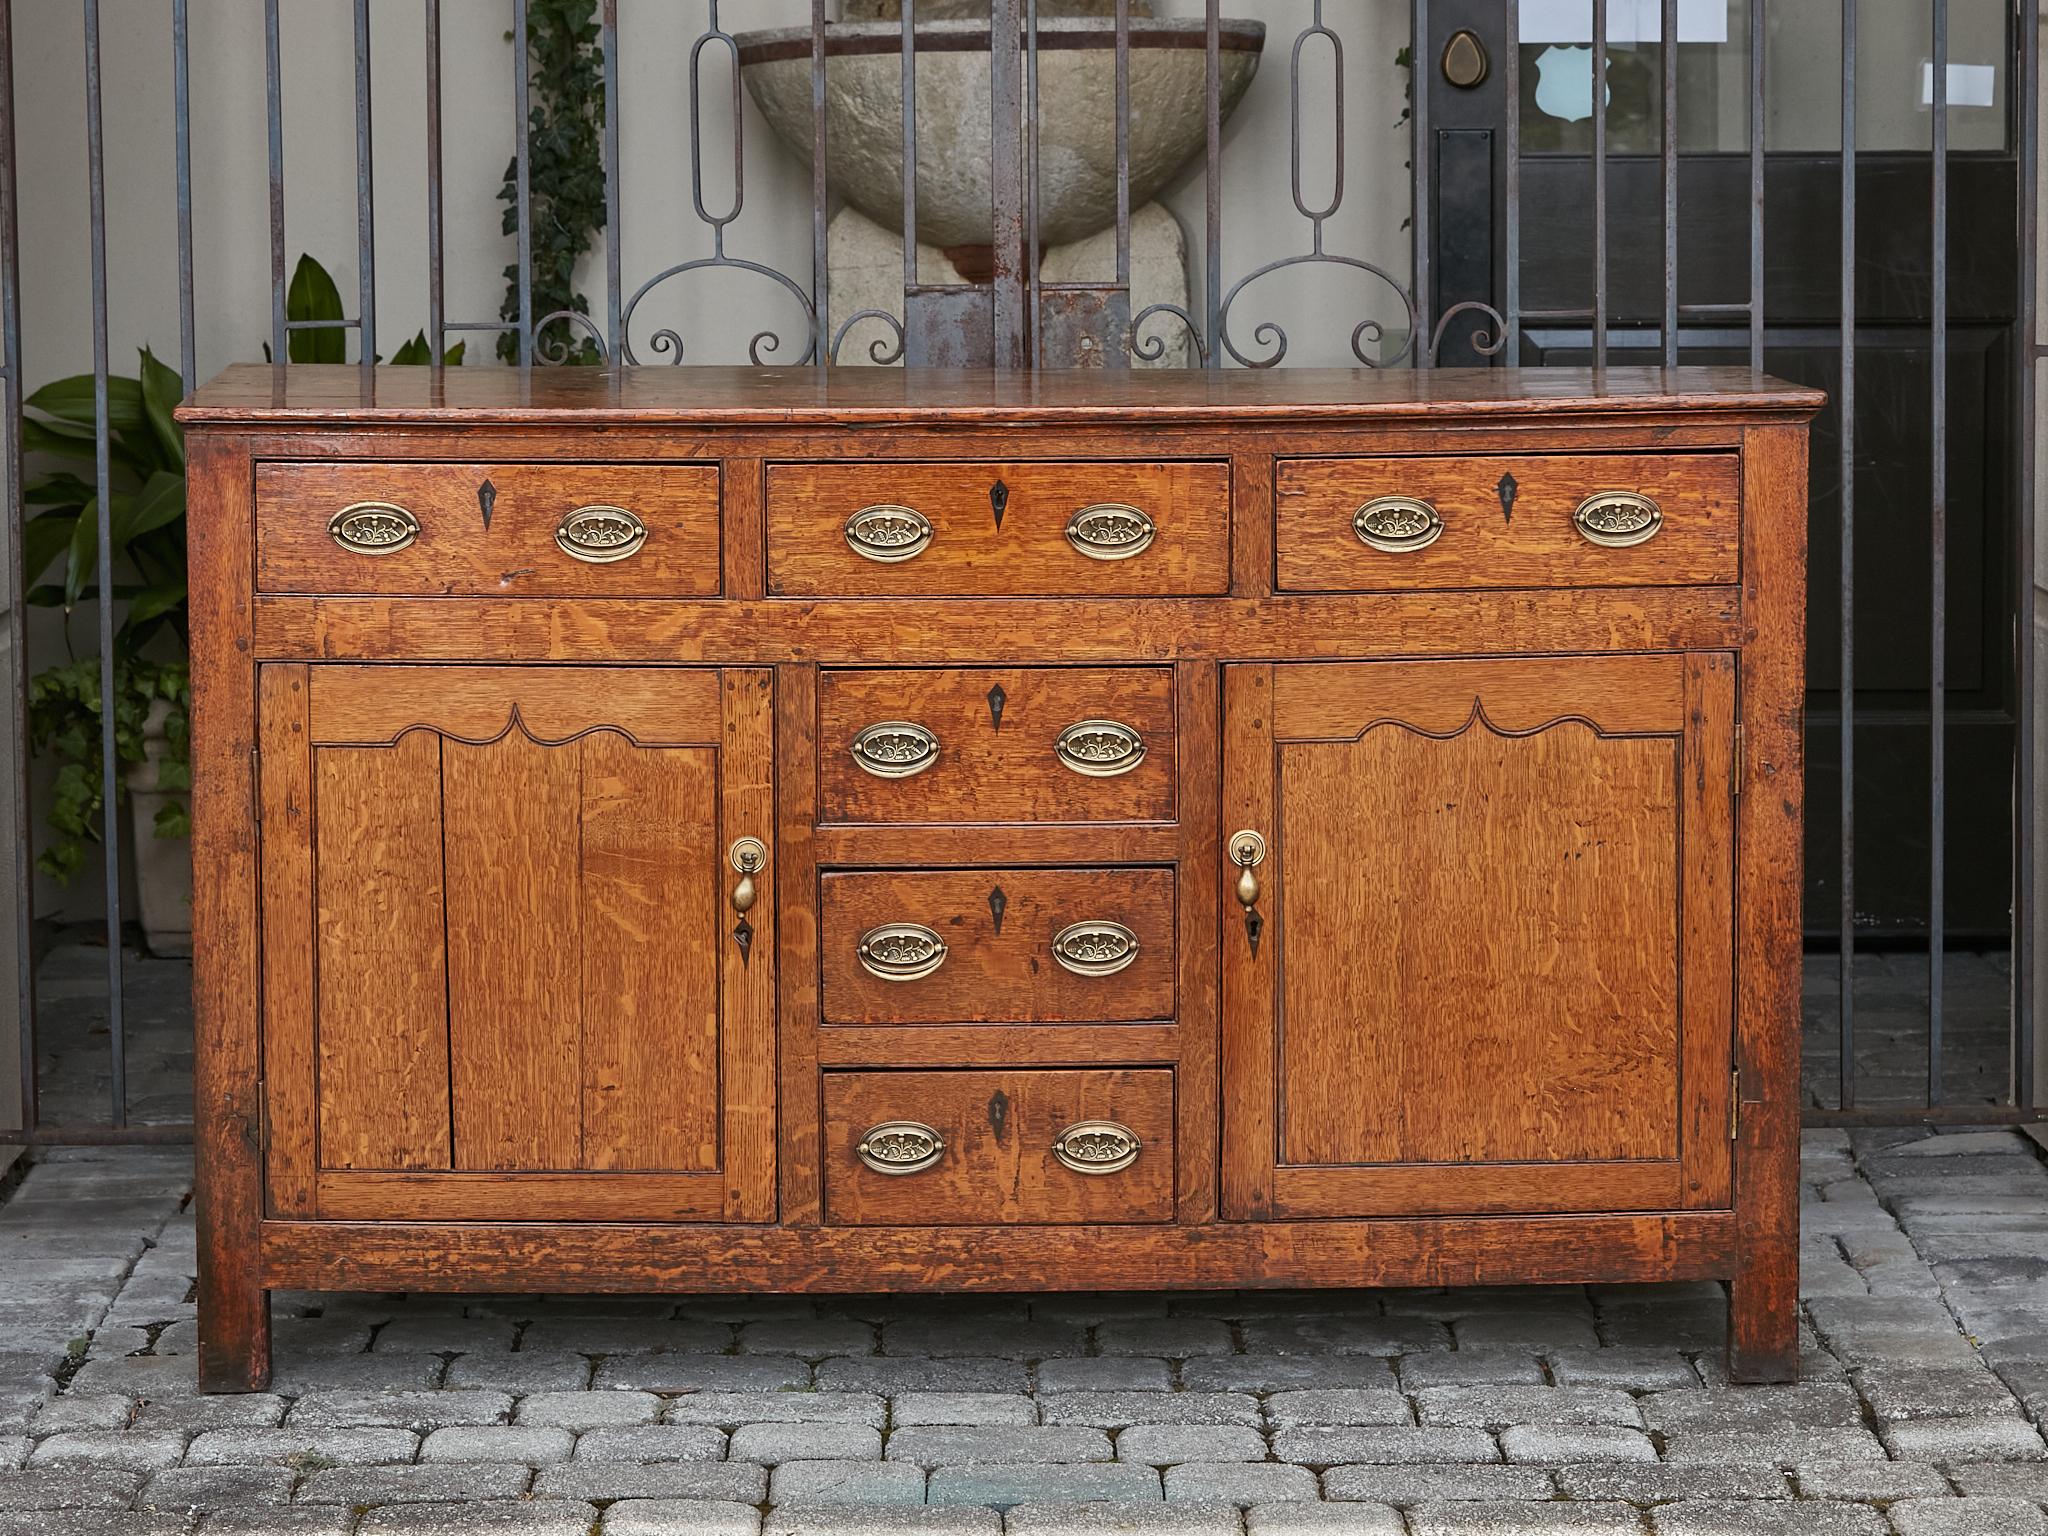 An English oak buffet from the 19th century with six drawers, two doors and brass hardware. This 19th-century English oak buffet is a handsome celebration of craftsmanship and practical design. Showcasing a warm, rich oak hue, the buffet is